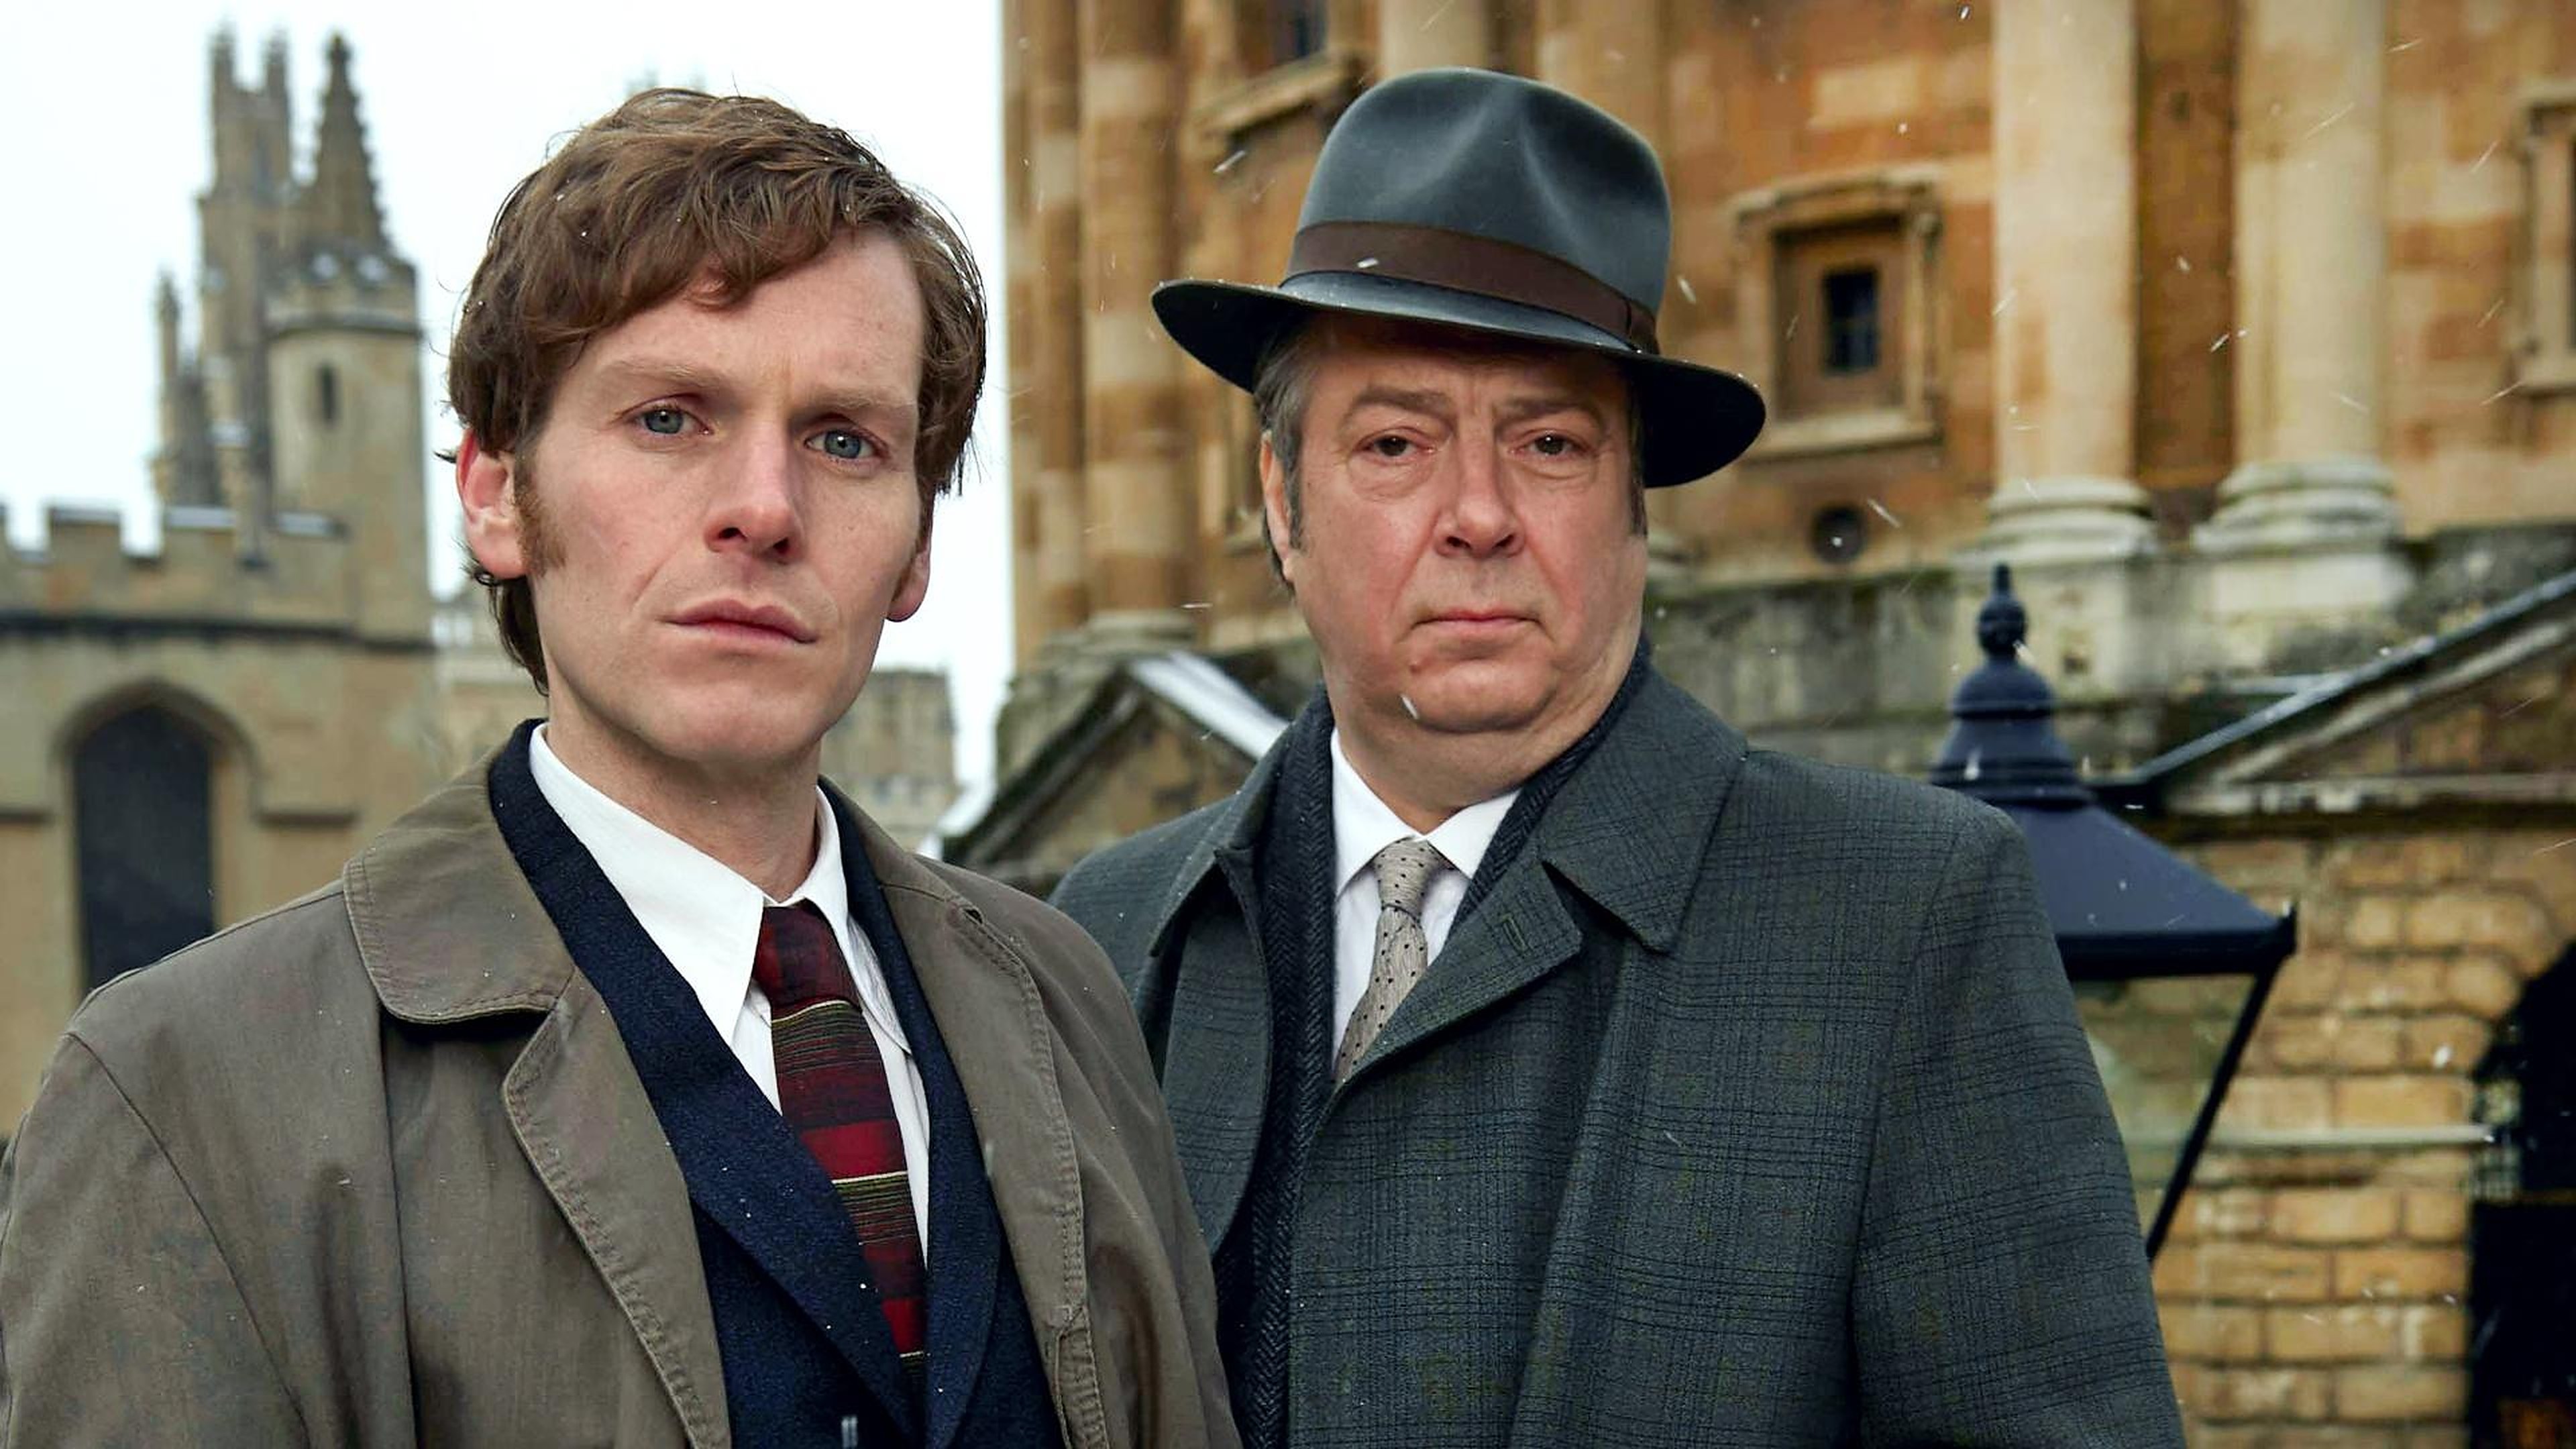 Is Endeavour on Netflix, HBO Max, Hulu, or Prime?